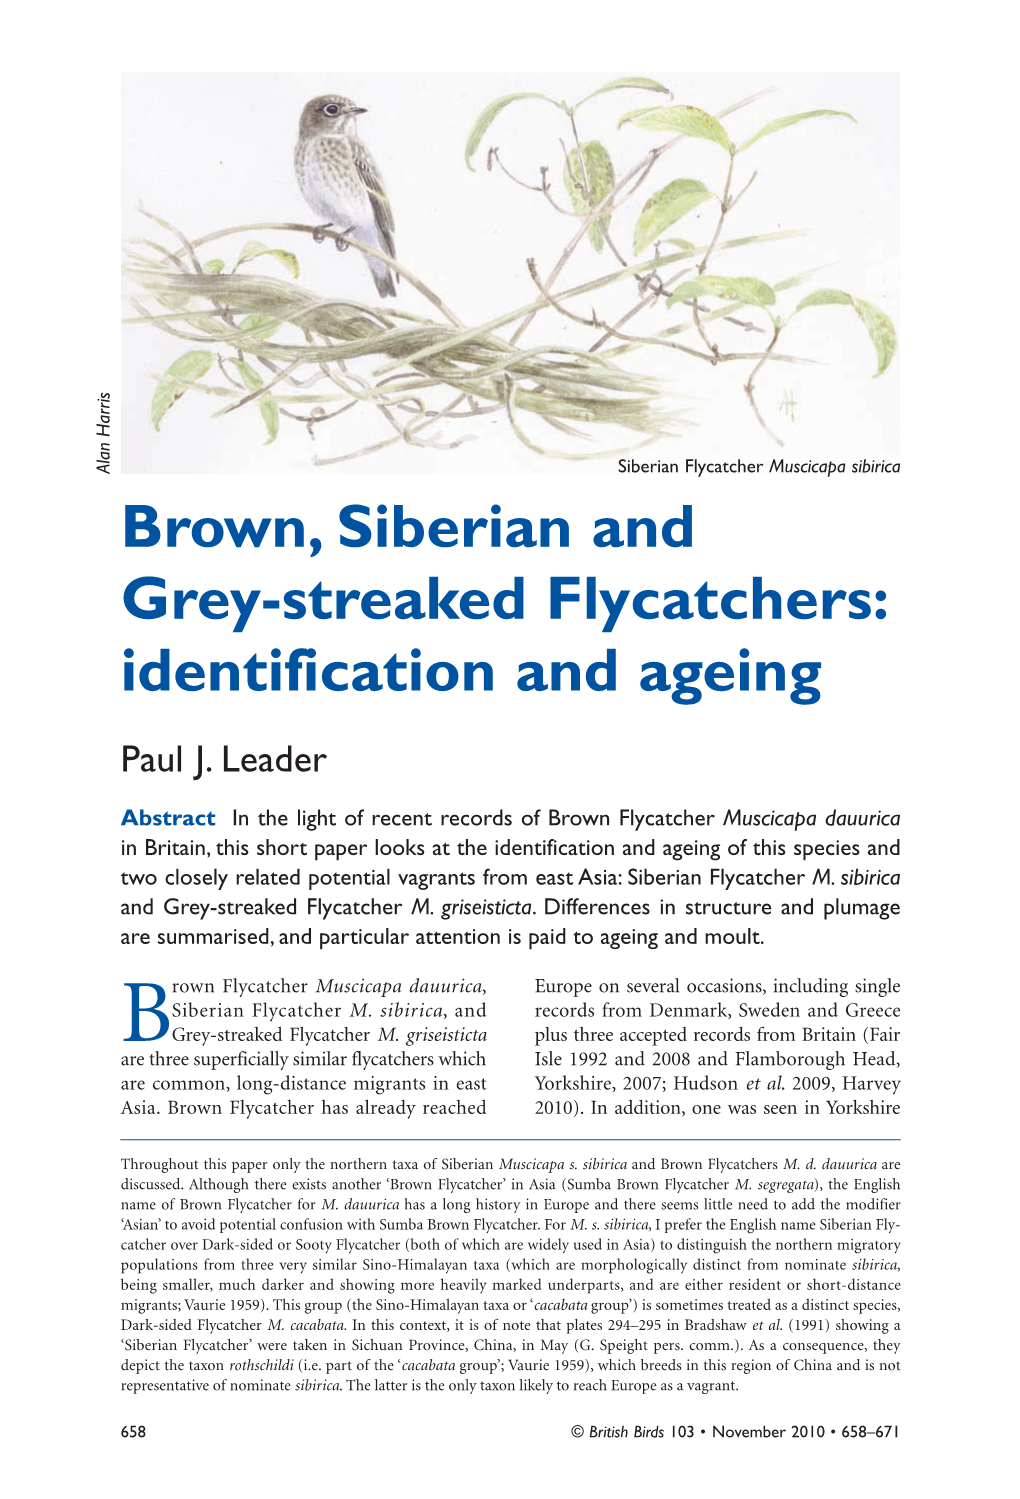 Brown, Siberian and Grey-Streaked Flycatchers: Identification and Ageing Paul J